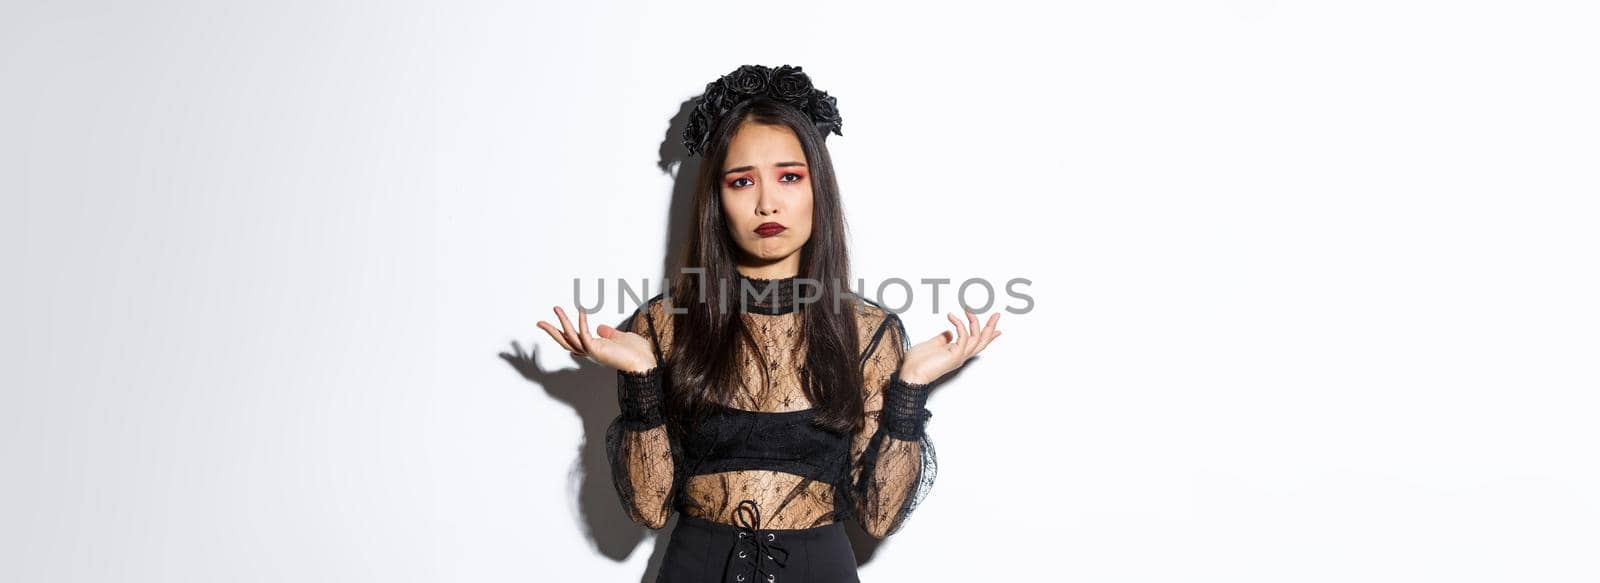 Clueless pensive asian girl in witch costume looking indecisive, shrugging with hands spread sideways, looking sad over white background by Benzoix